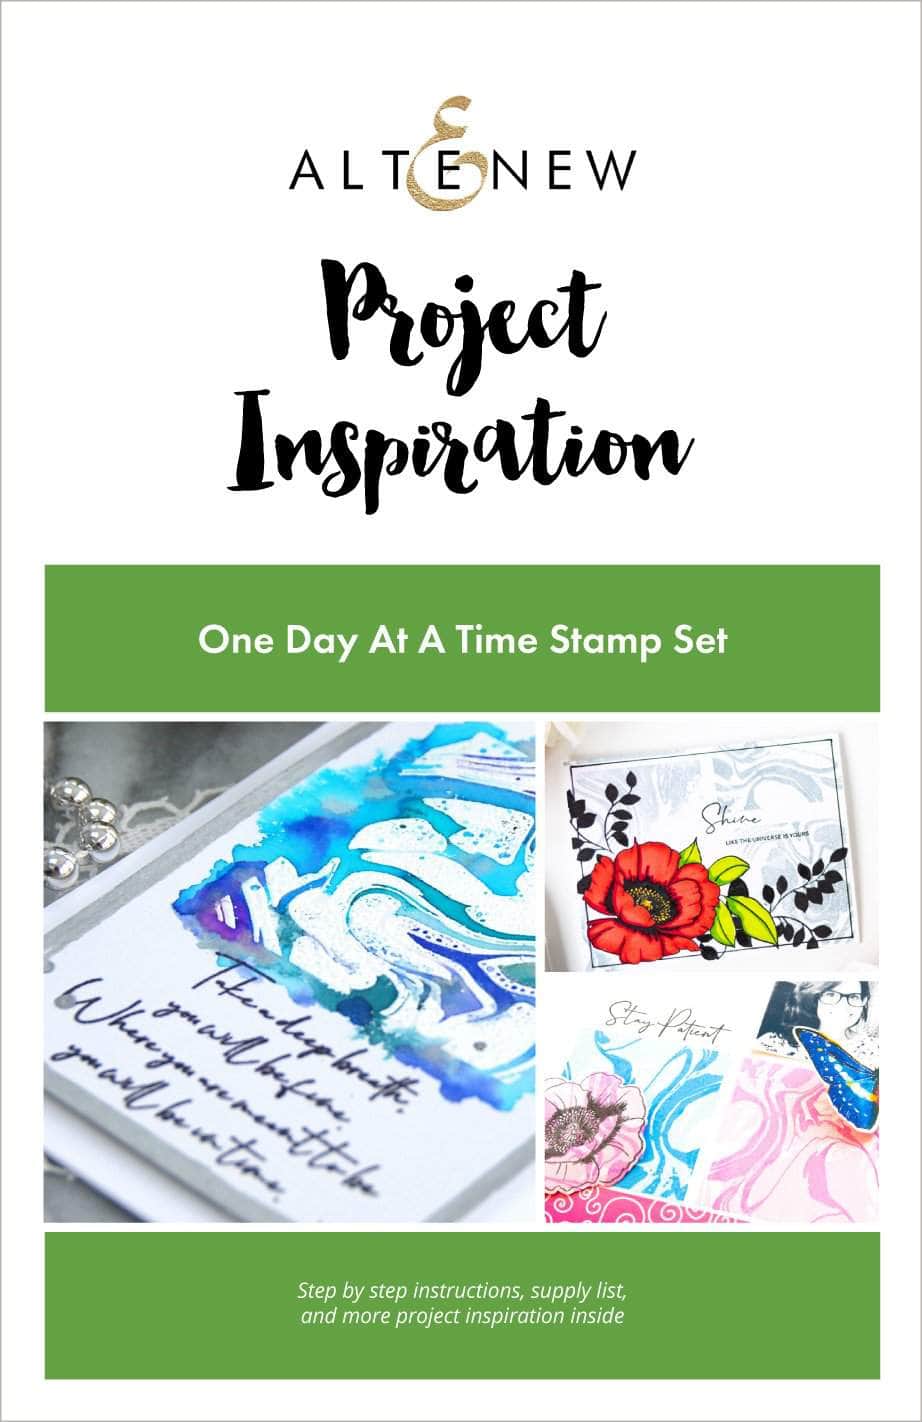 Printed Media One Day At A Time Inspiration Guide